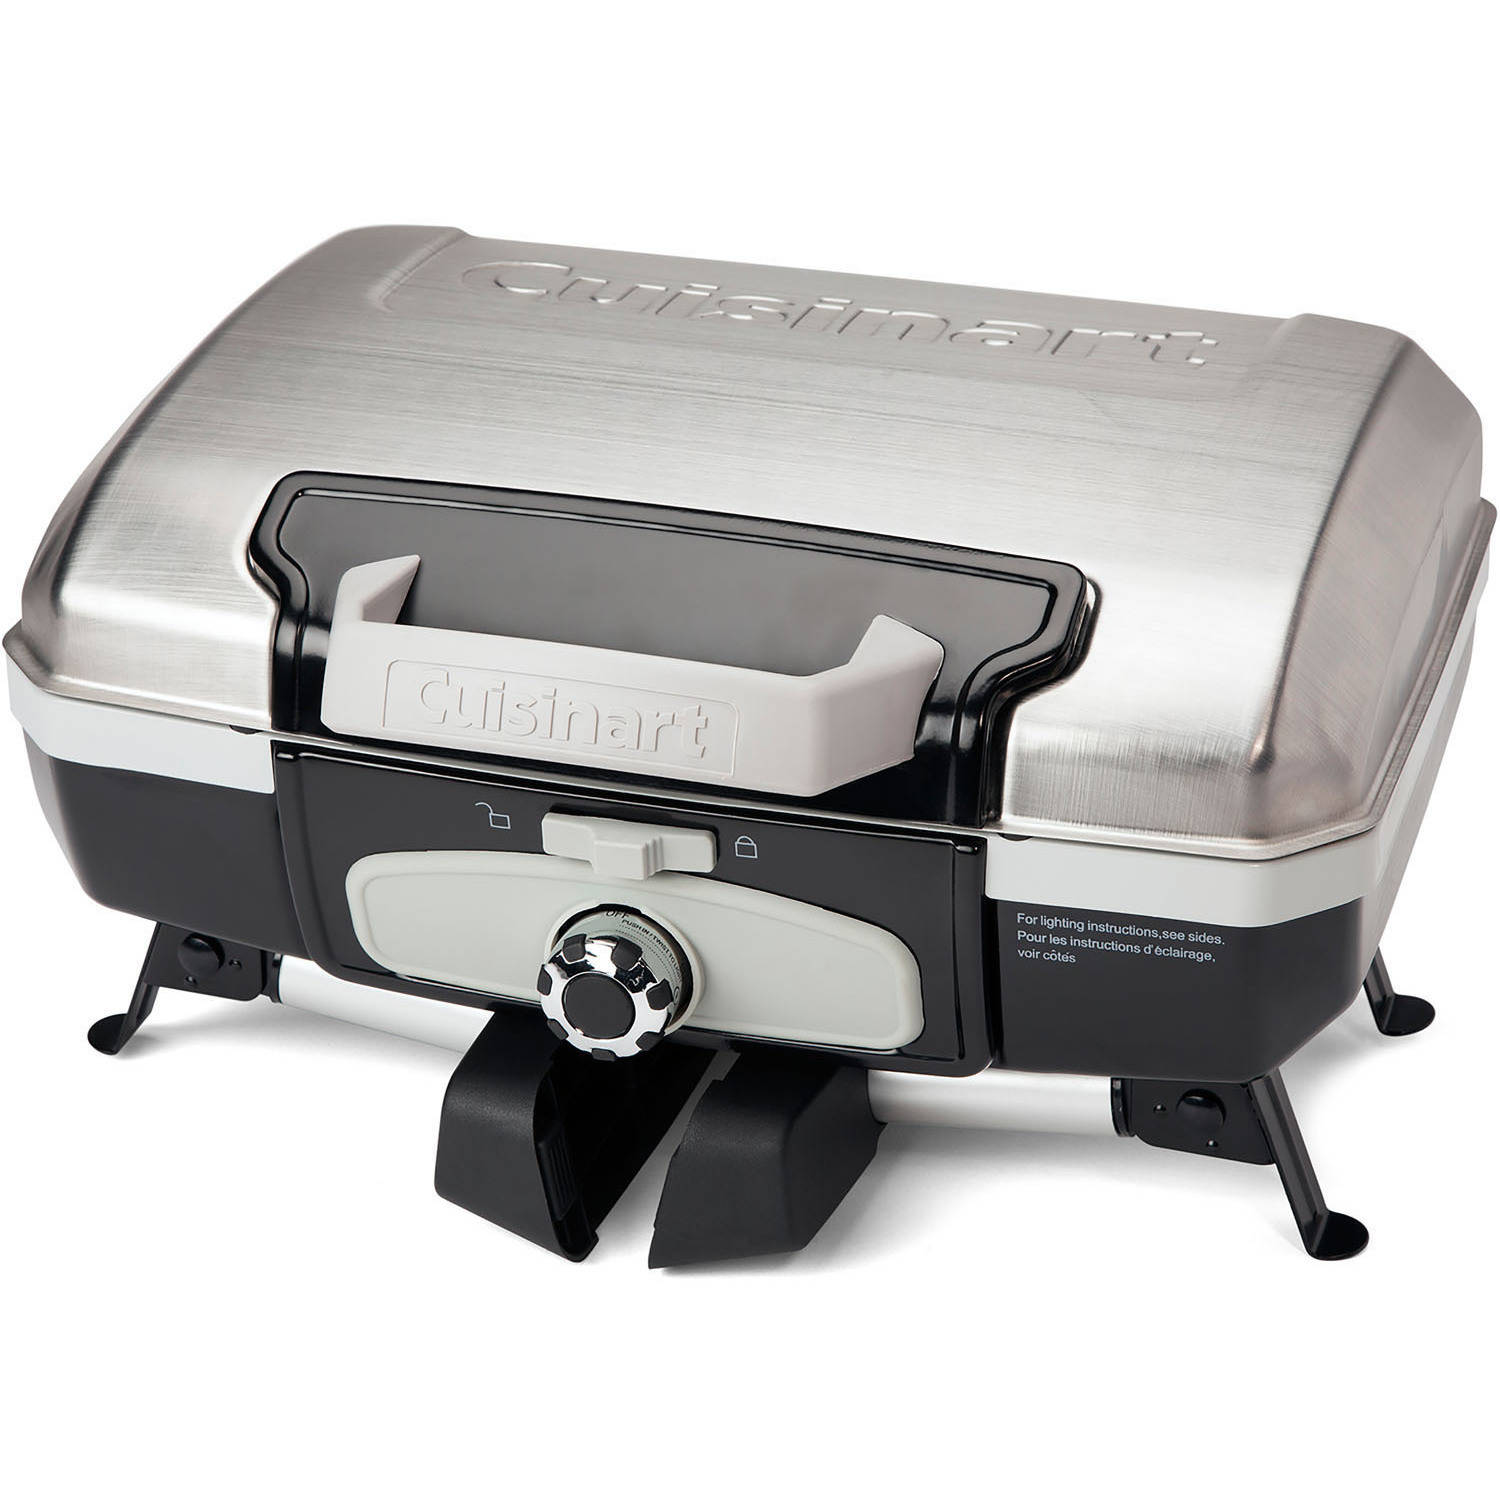 Cuisinart Petit Gourmet Portable Tabletop Outdoor LP Gas Grill, Silver/Black - image 2 of 3